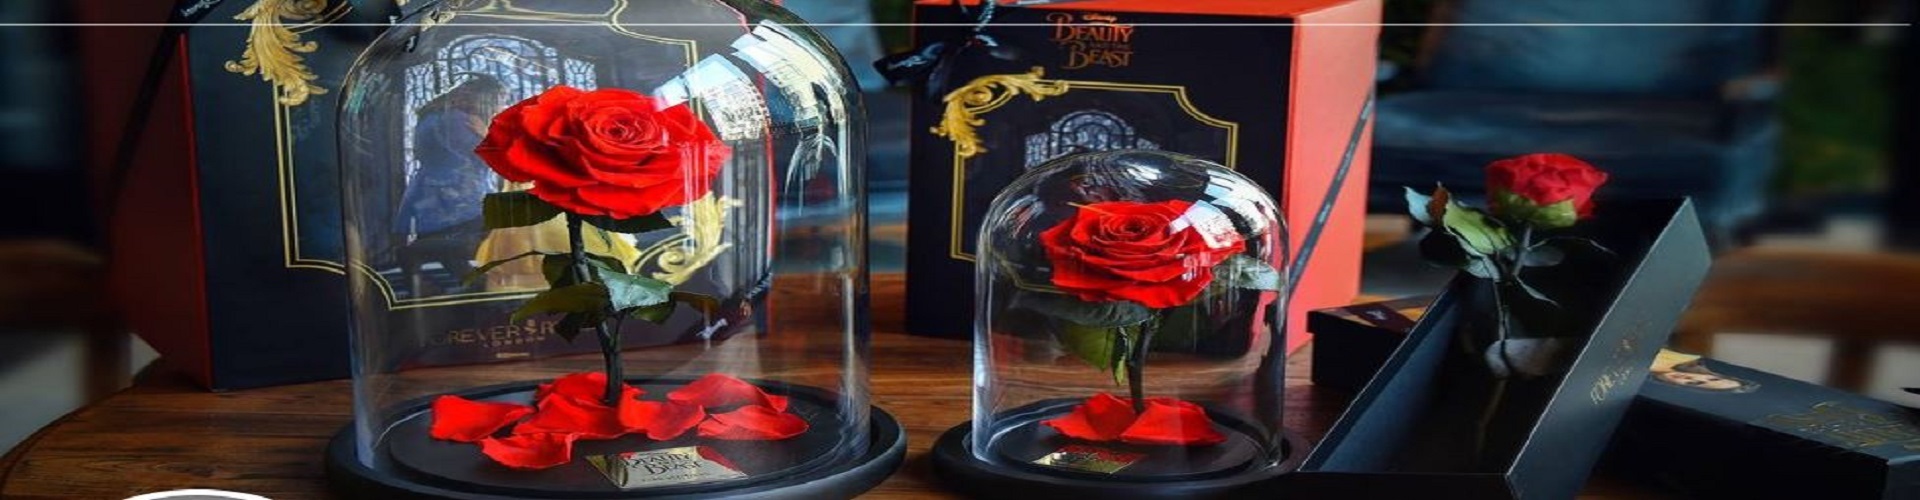 two red roses on a glass cover